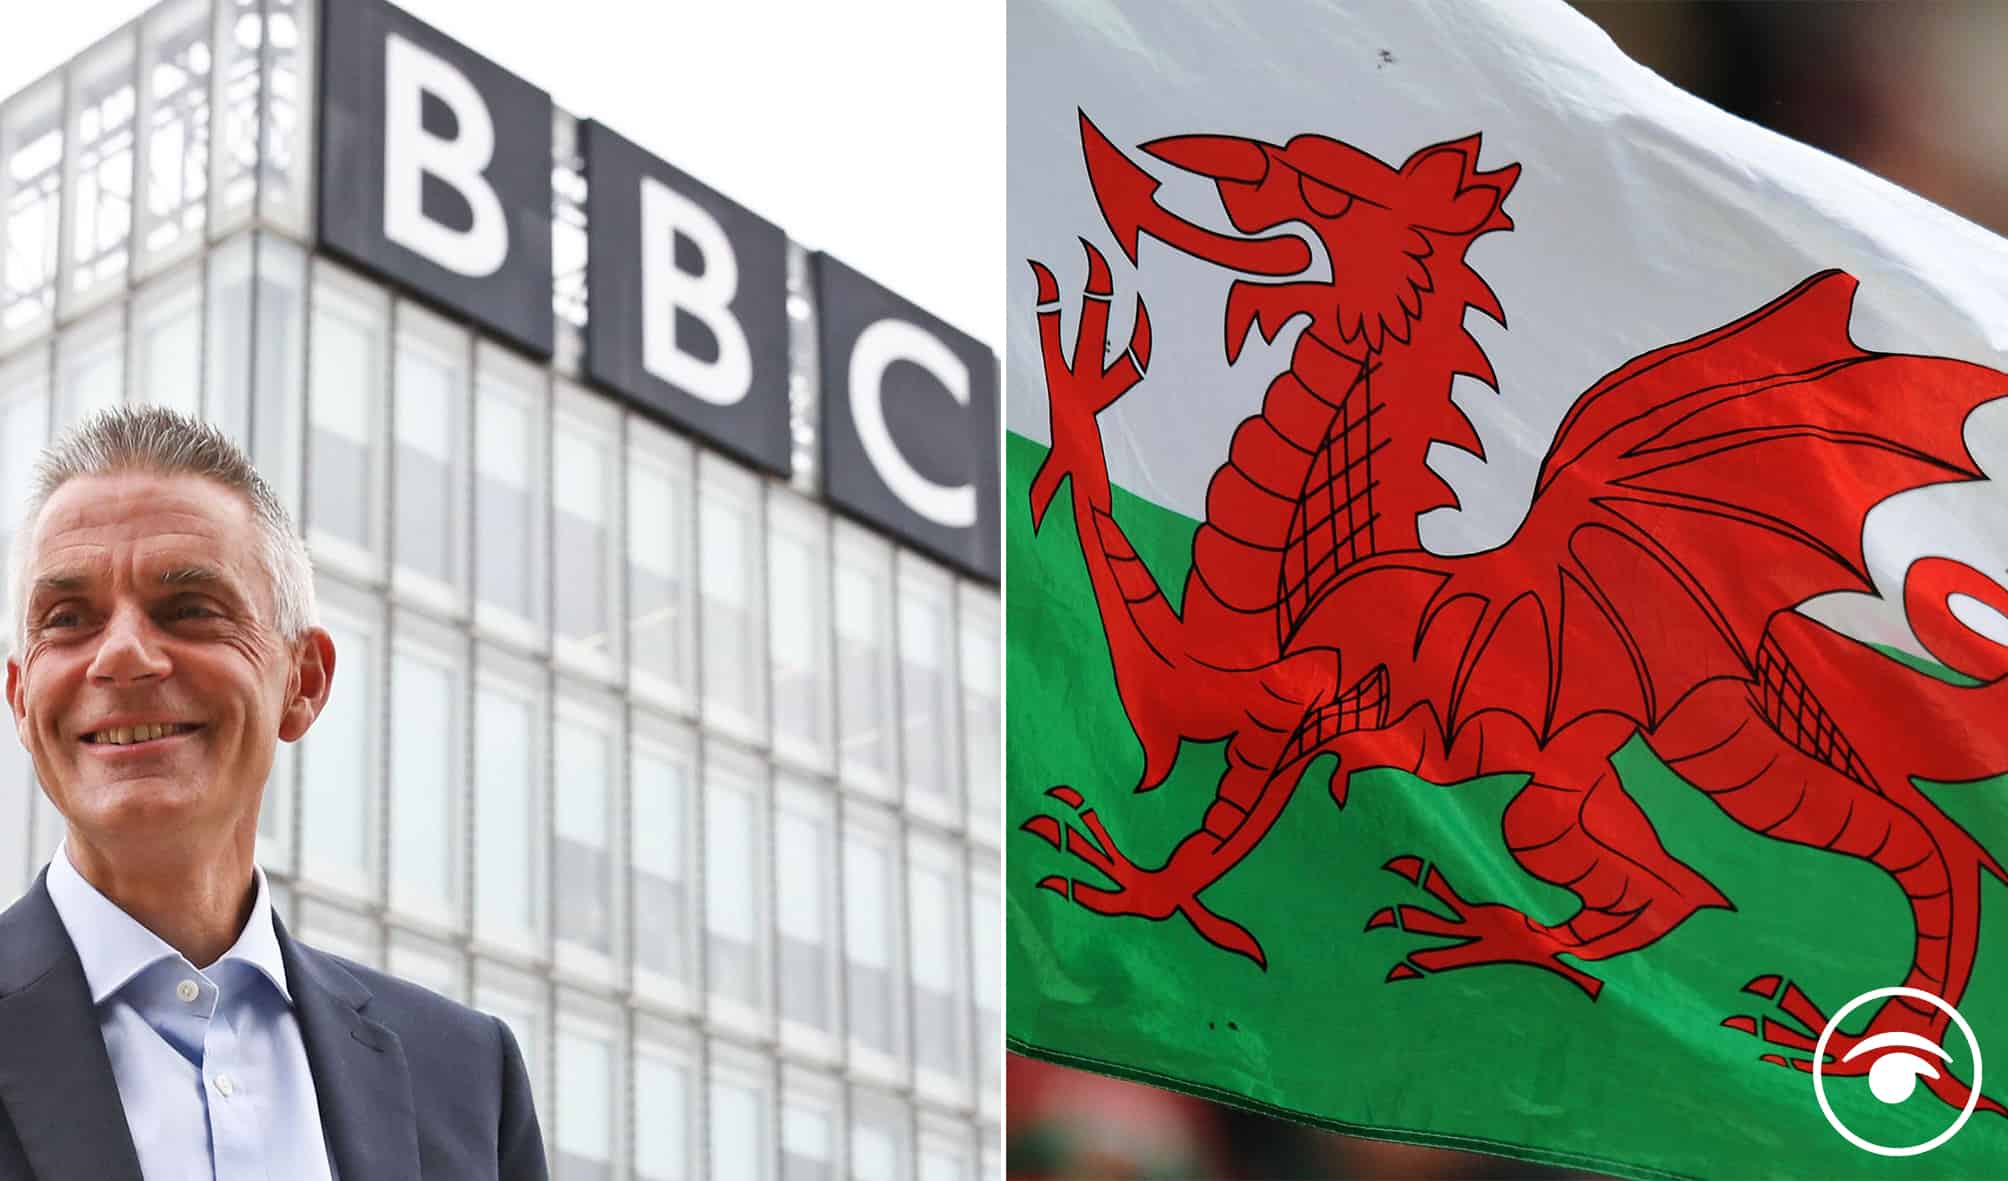 Reactions as BBC presenter ‘ordered’ to delete tweet of himself with Welsh flag by TV bosses